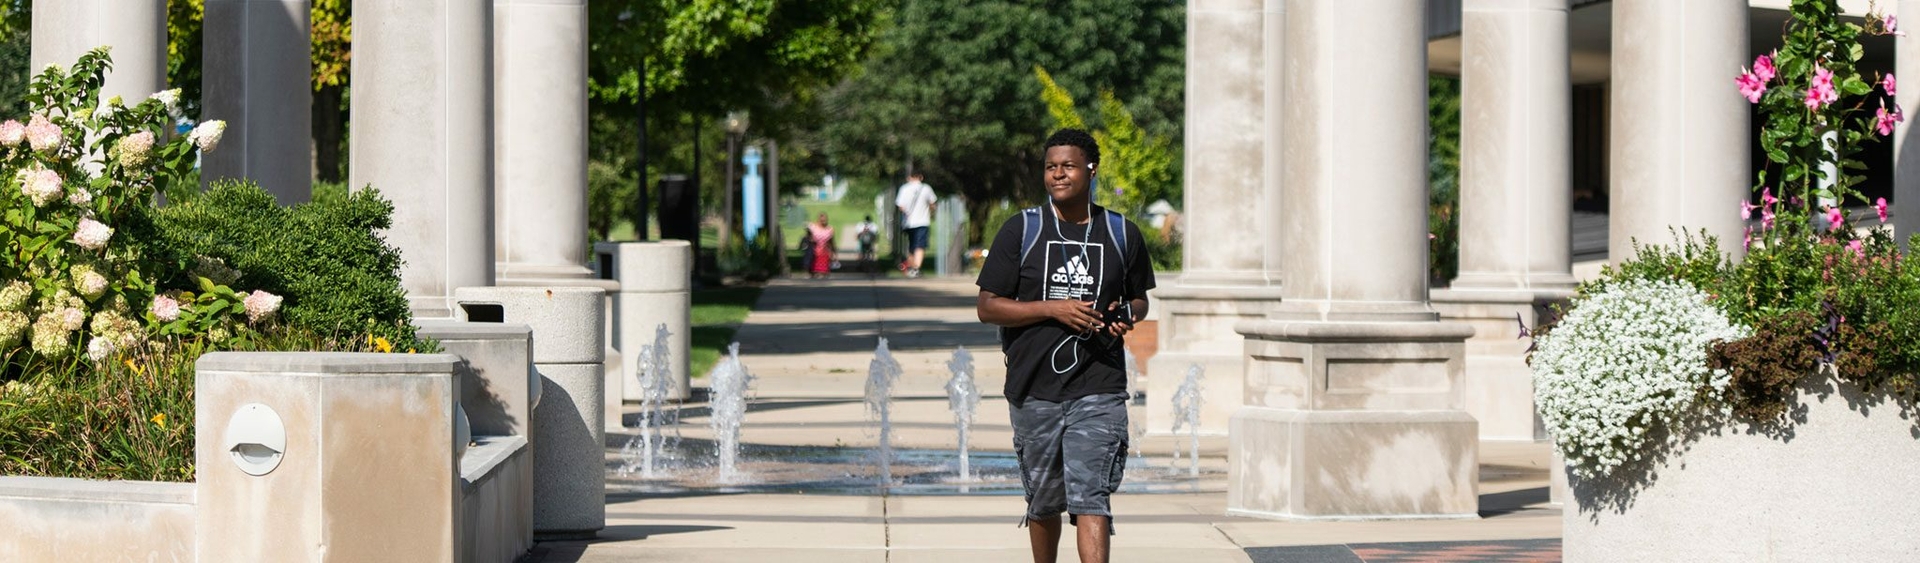 student in front of colonnade